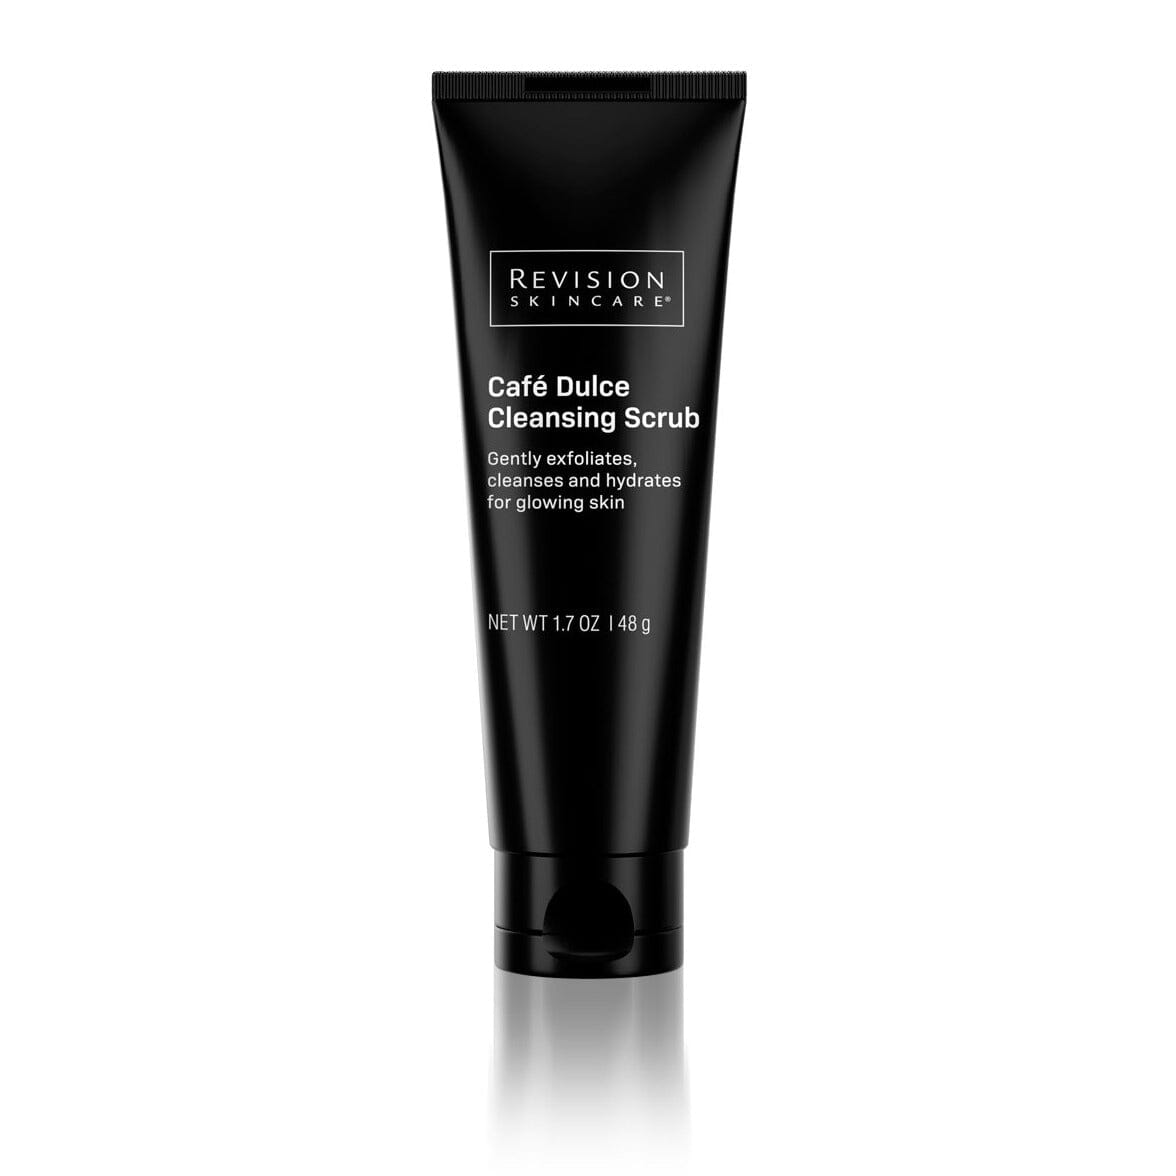 Revision Skincare Cafe Dulce Cleansing Scrub Limited Edition Revision 1.7 oz. Shop at Exclusive Beauty Club